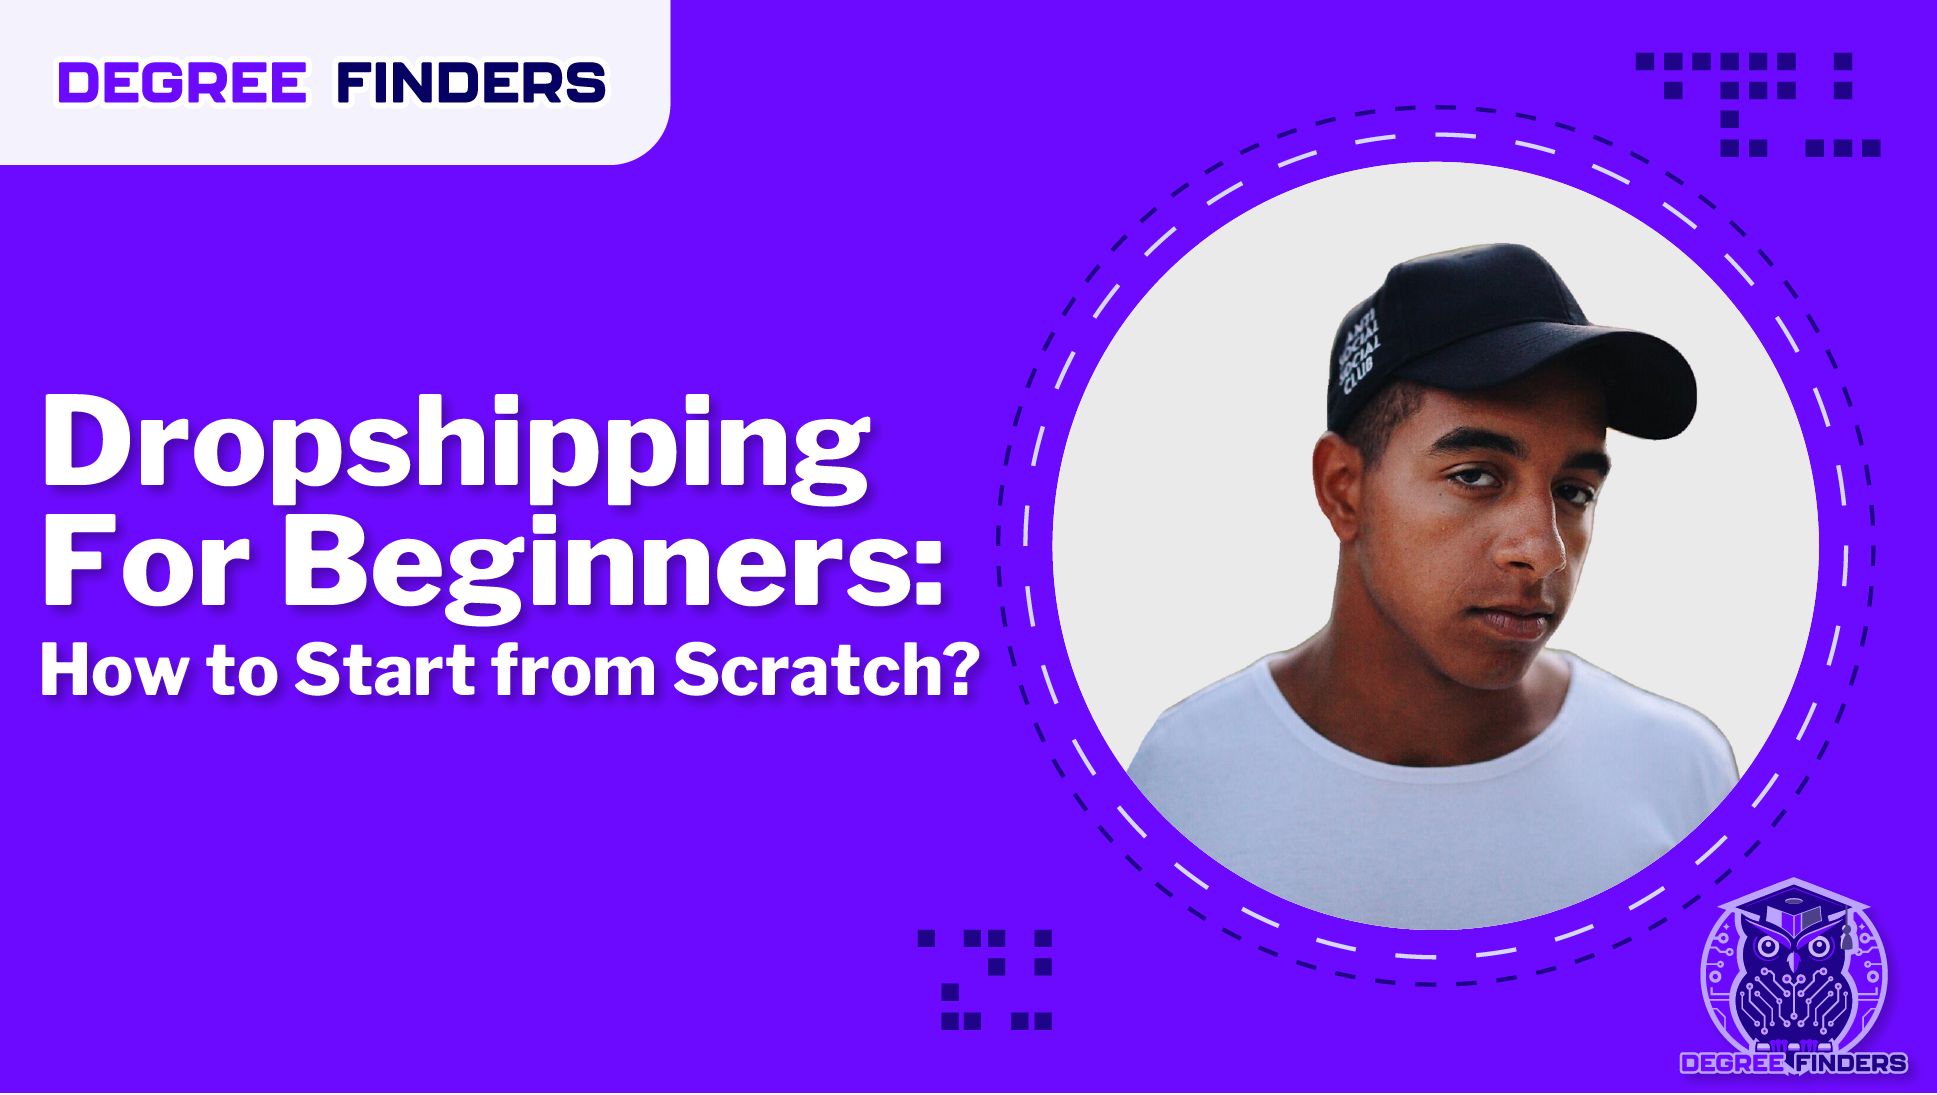 Dropshipping for Beginners